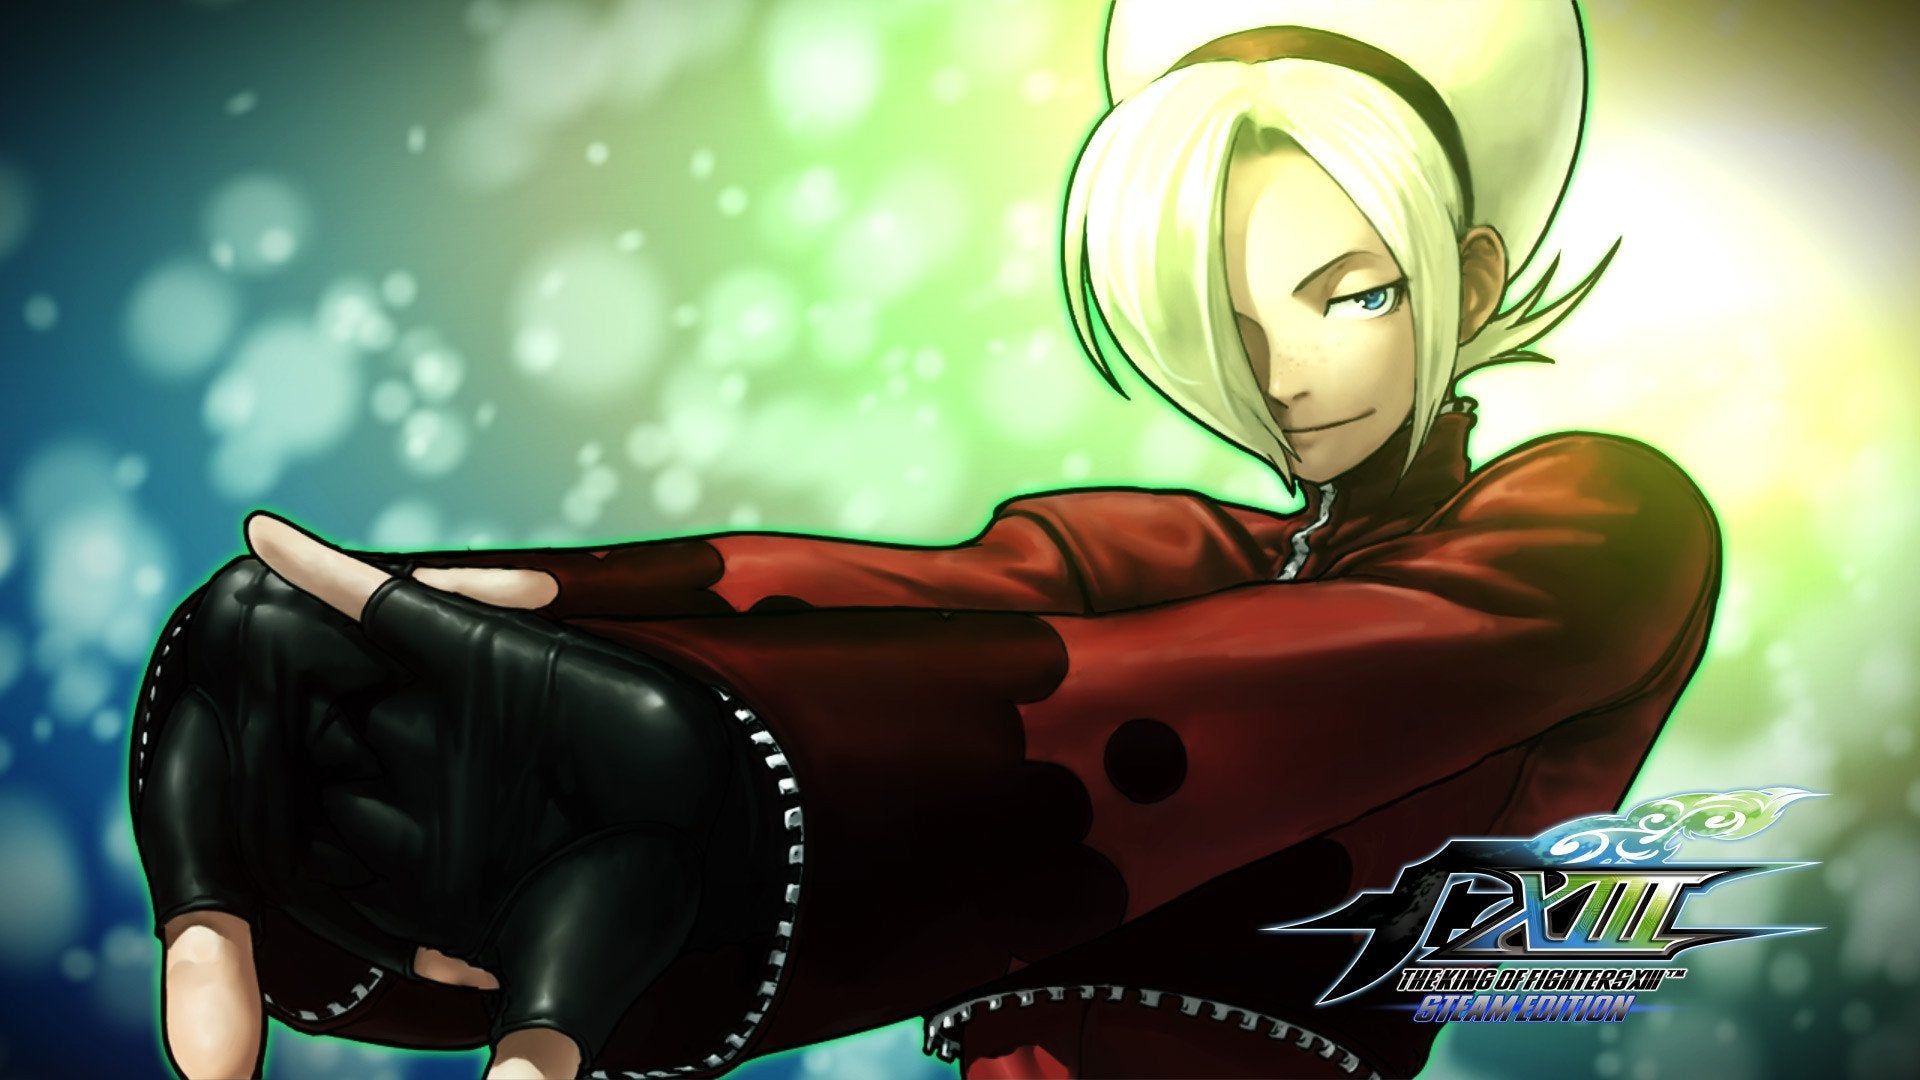 All Steam card wallpaper for King of Fighters XIII PC those missing cards or can't get a full set